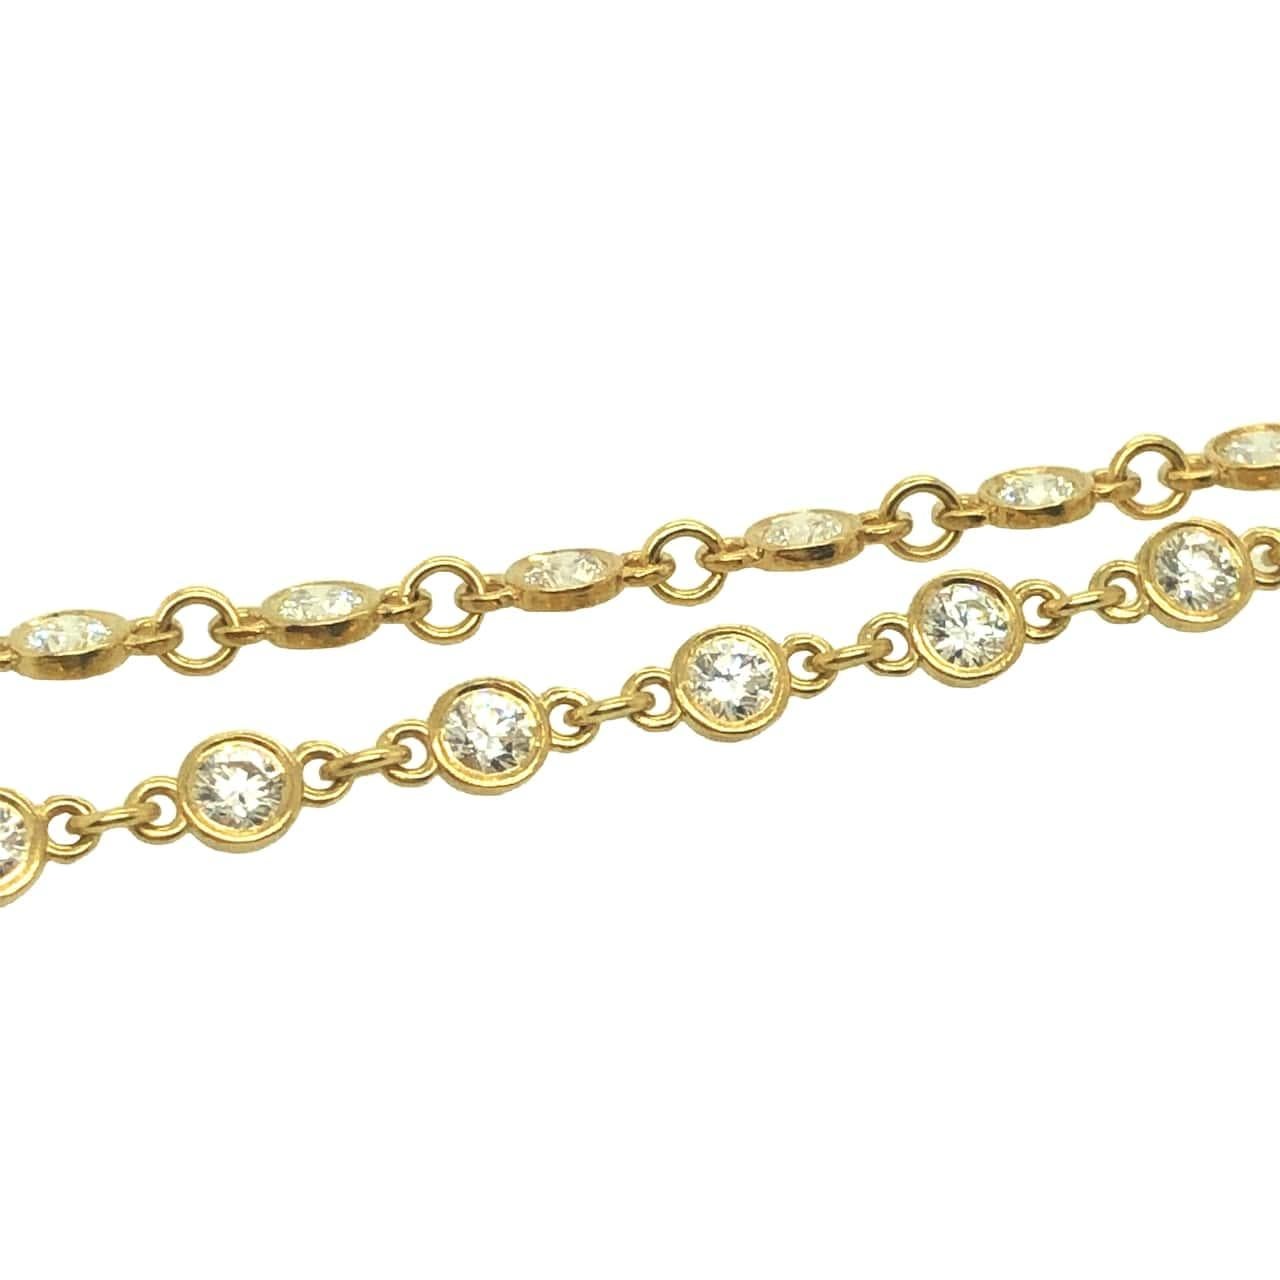 Contemporary Gems Are Forever 3.25 Ct. Diamond Link Chain Necklace 18K Yellow Gold For Sale